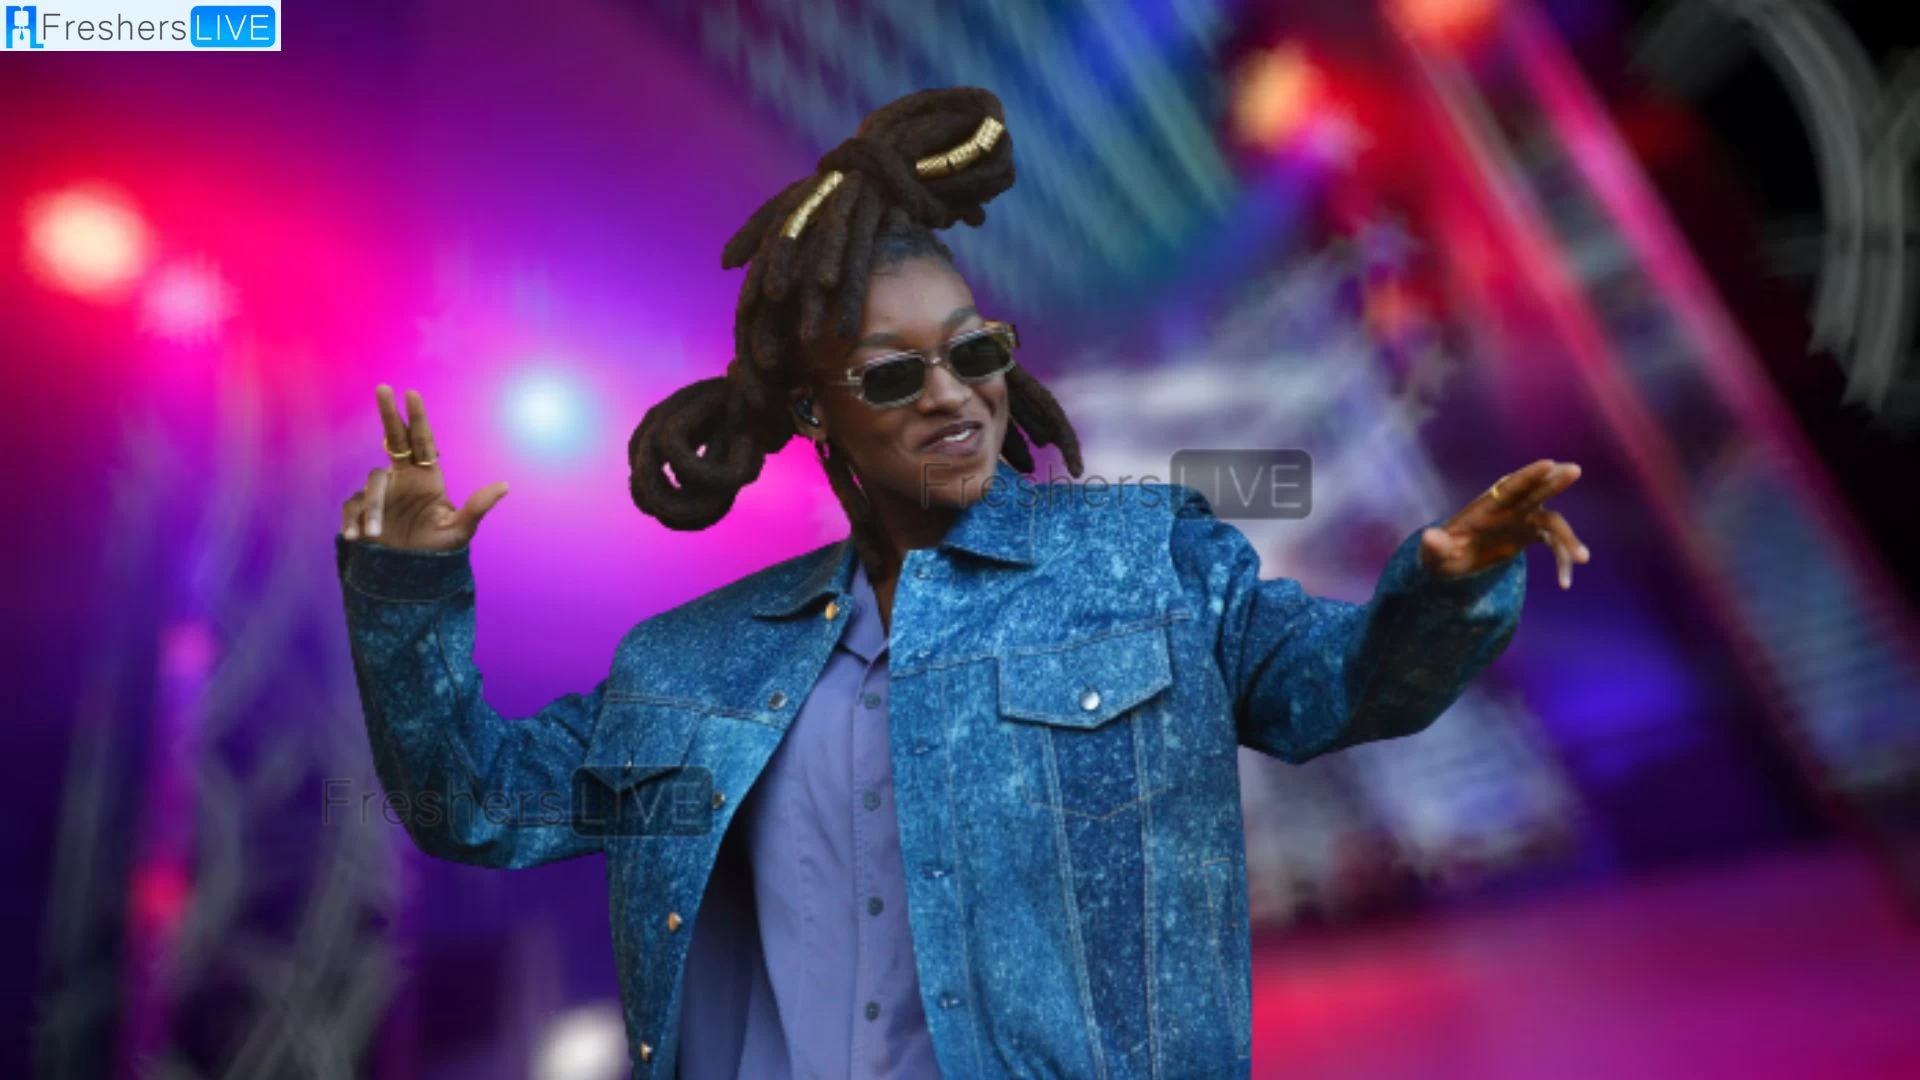 Little Simz 2023 UK Tour Dates and Concerts, How to Get Little Simz Presale Code Tickets?